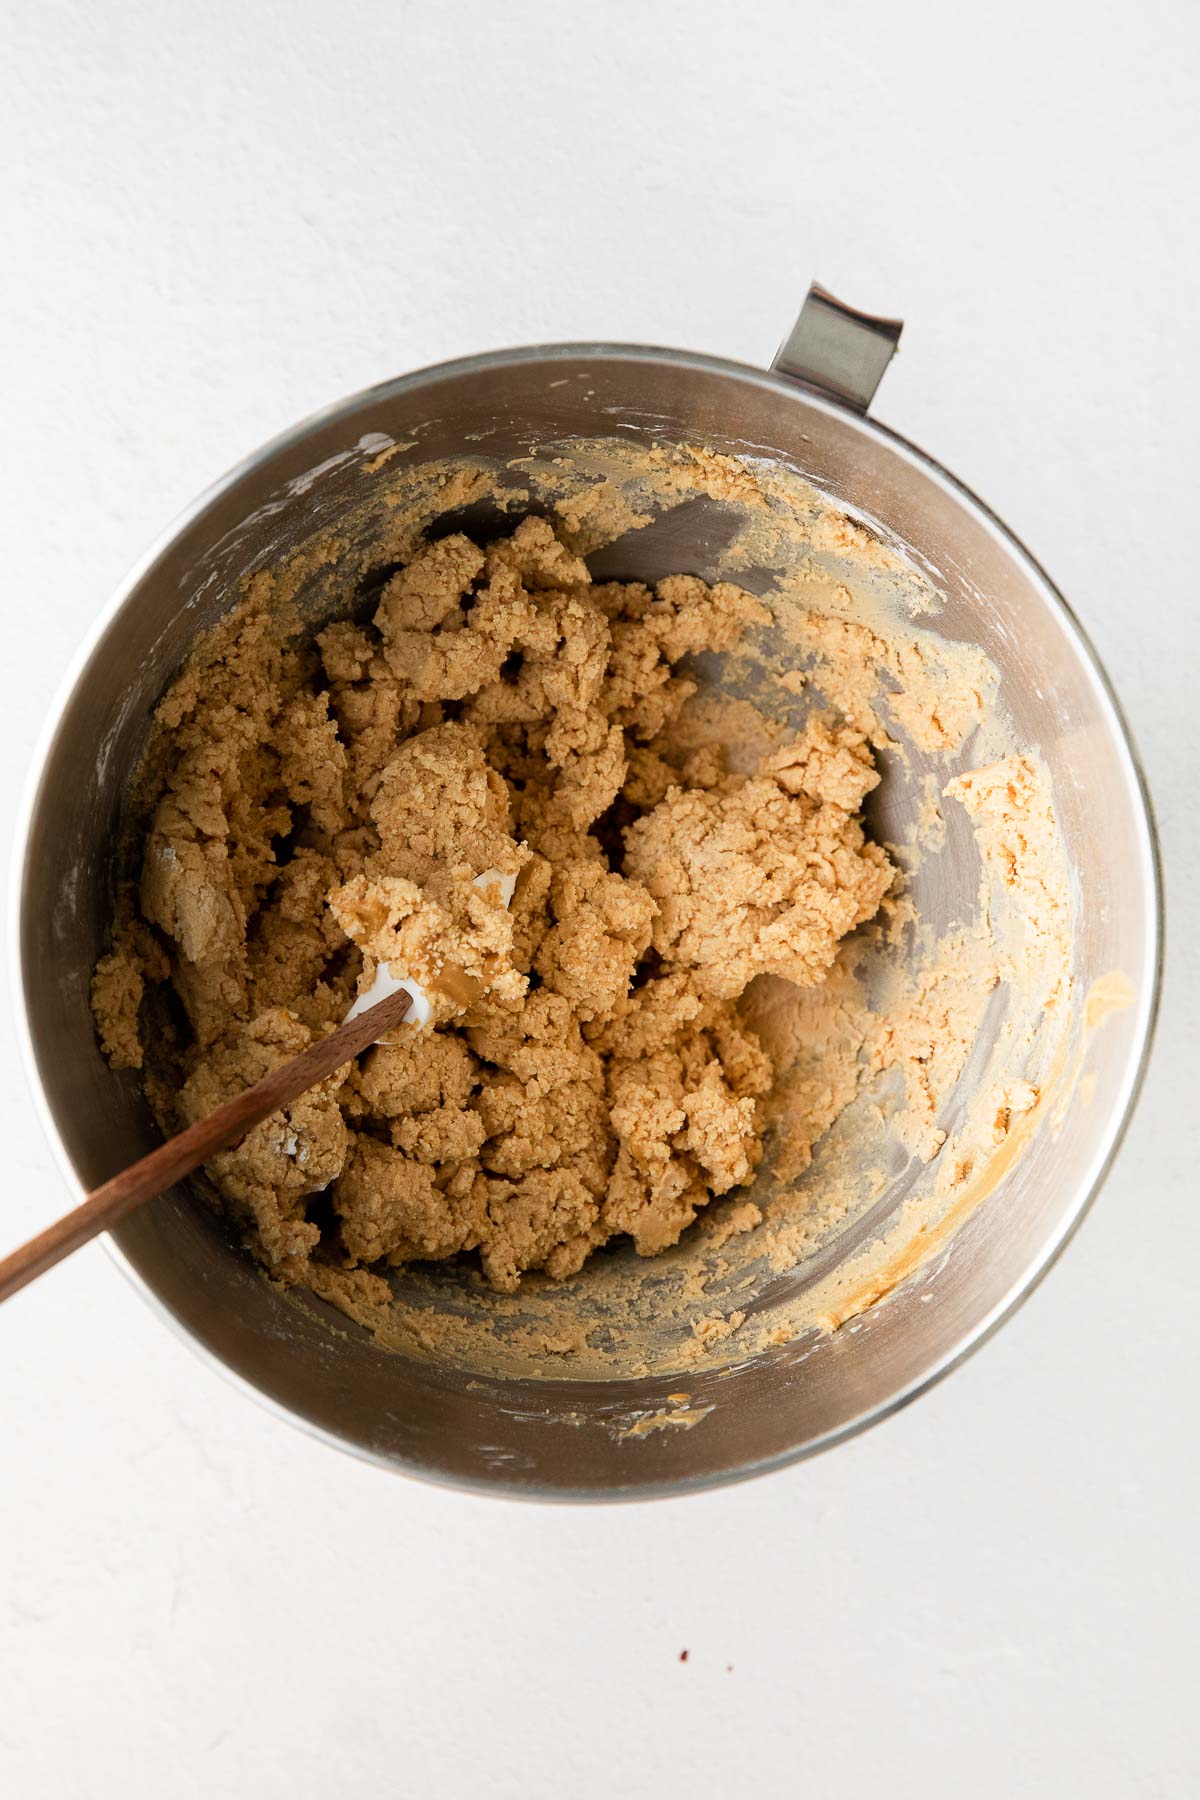 peanut butter and powdered sugar mixture in a big bowl